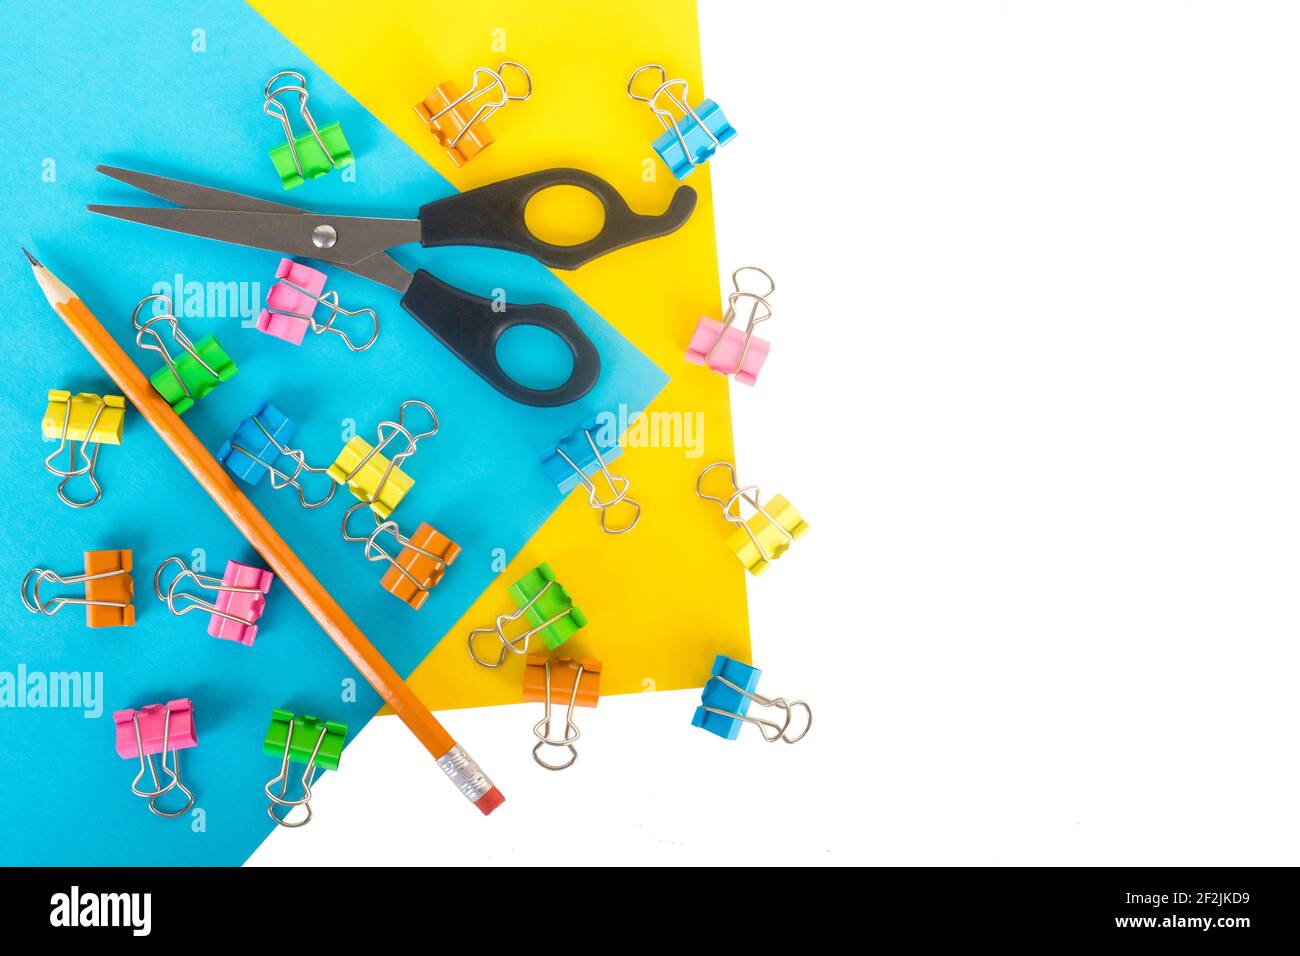 Stationary flat lay on blue and yellow paper with white background and empty space on one side. Lots of small colored paper clips, little scissors, an Stock Photo